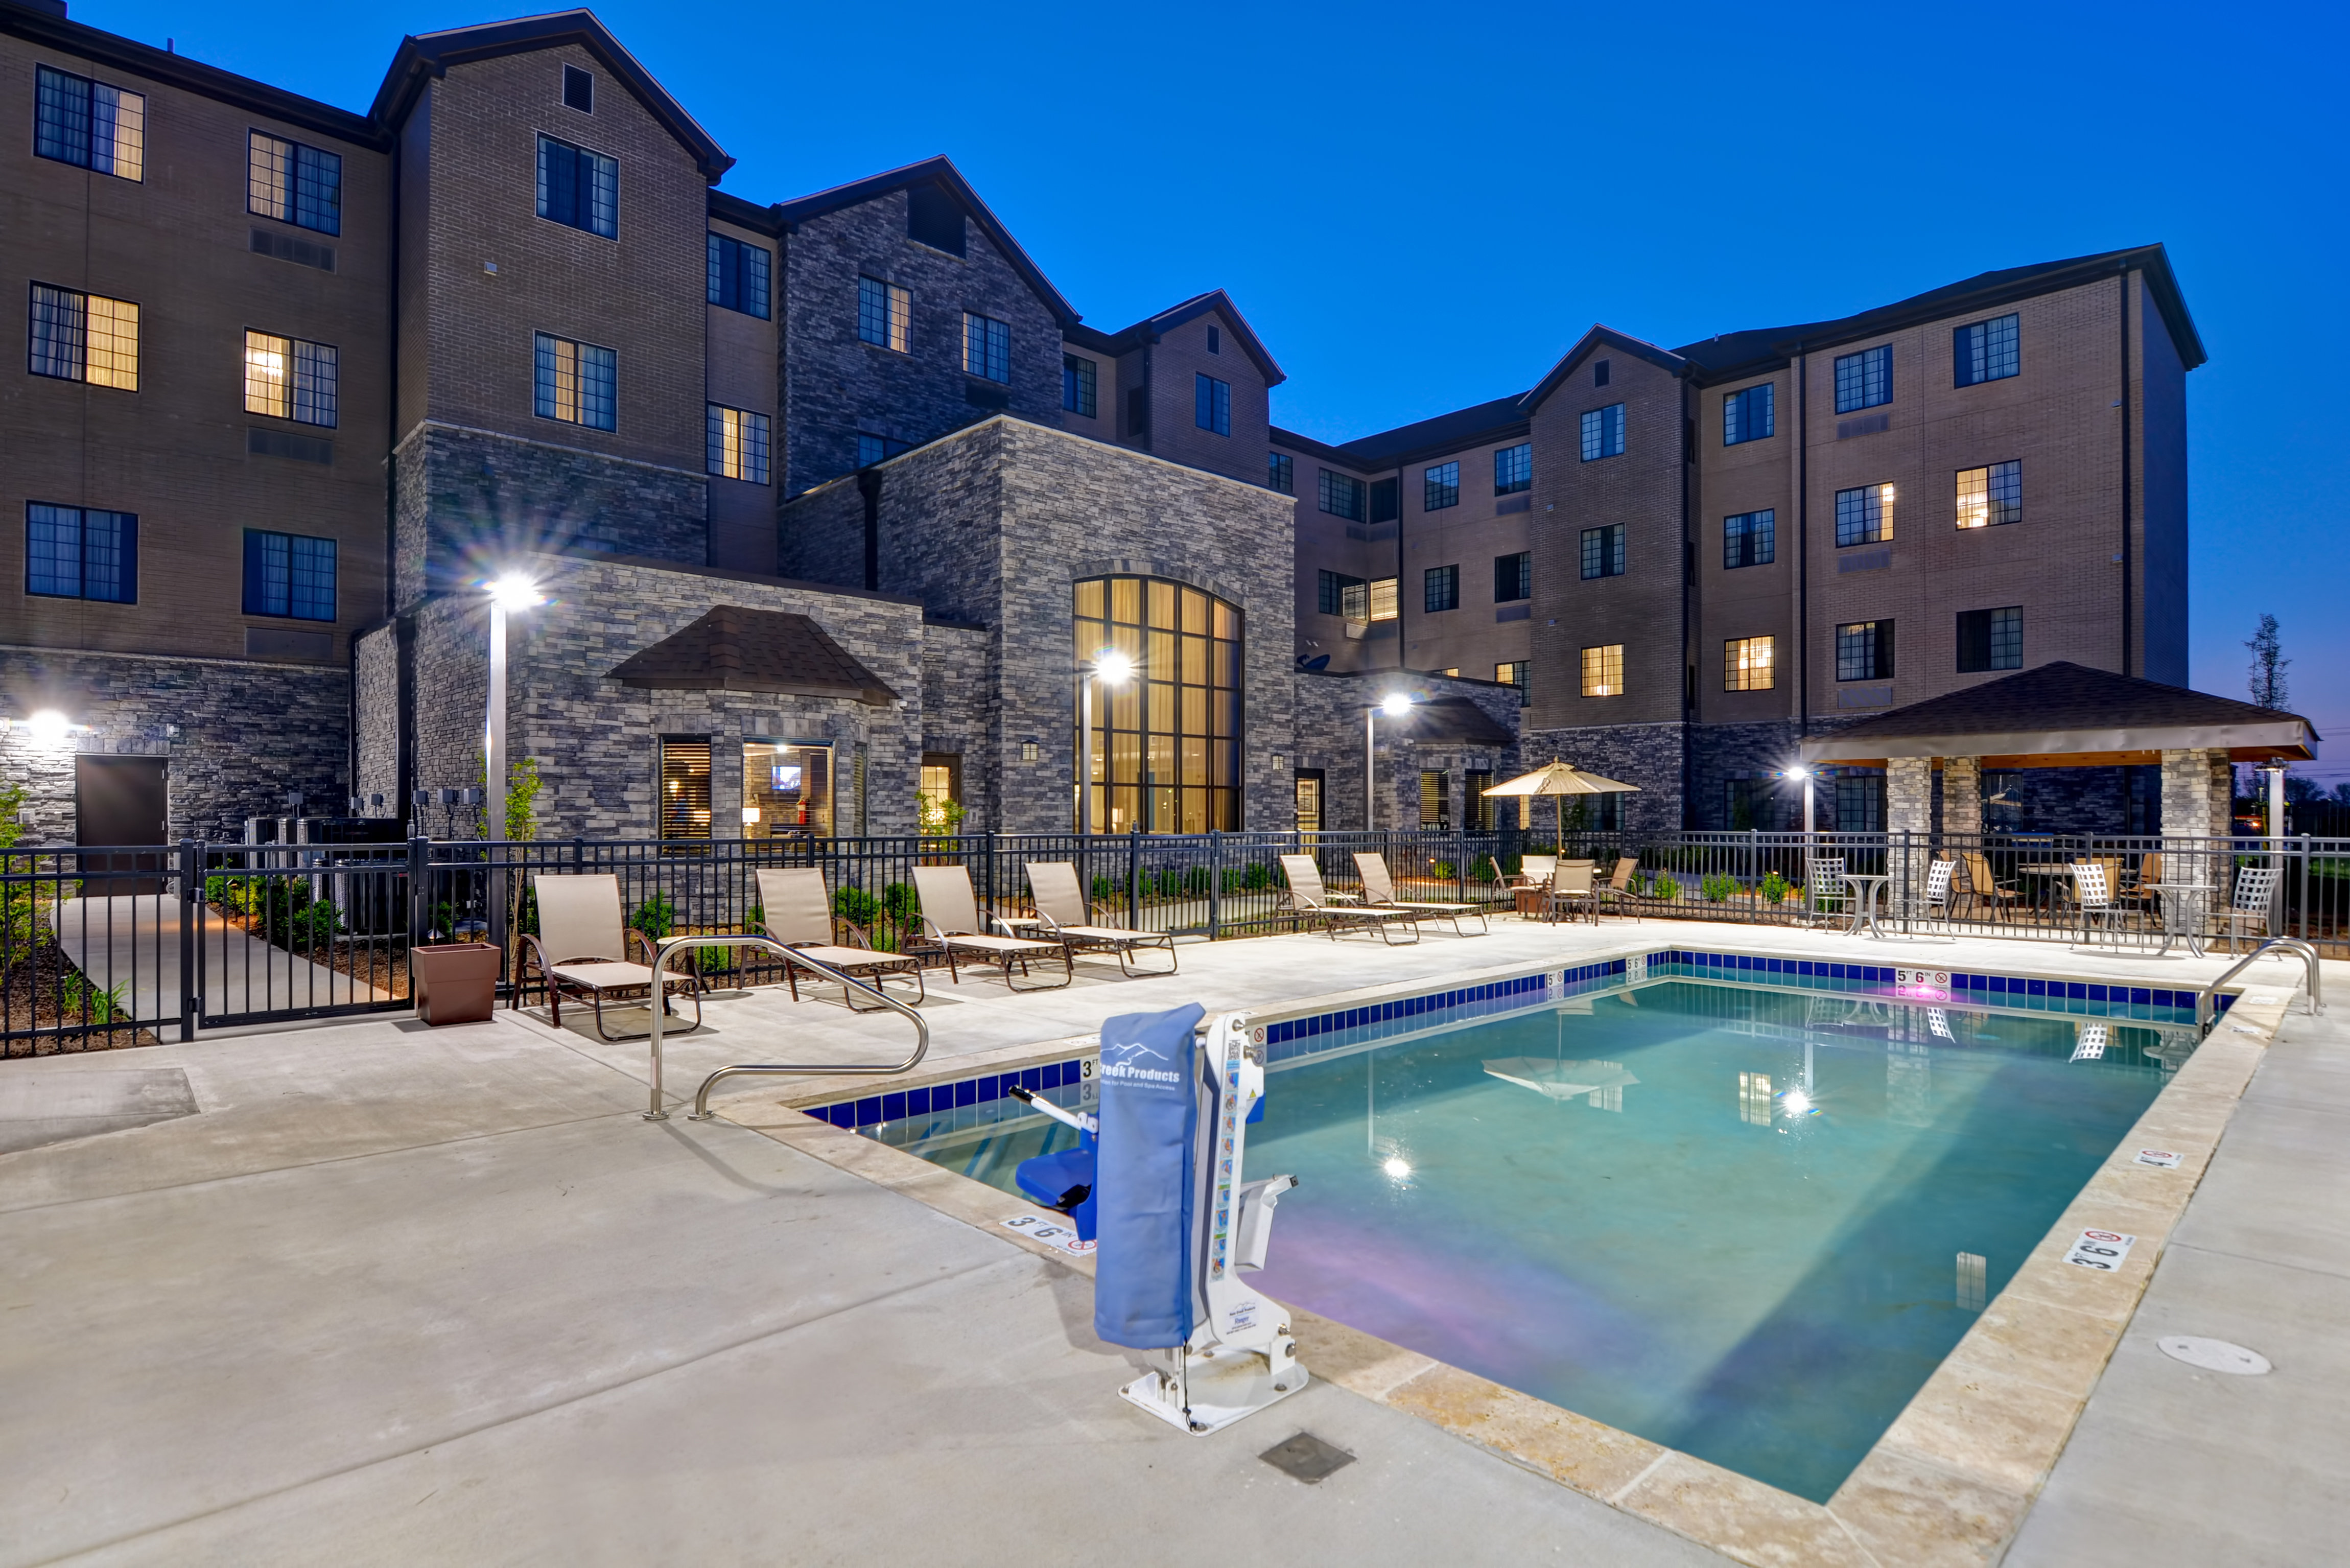 Have a morning or afternoon dip in our outdoor pool in Nashville.